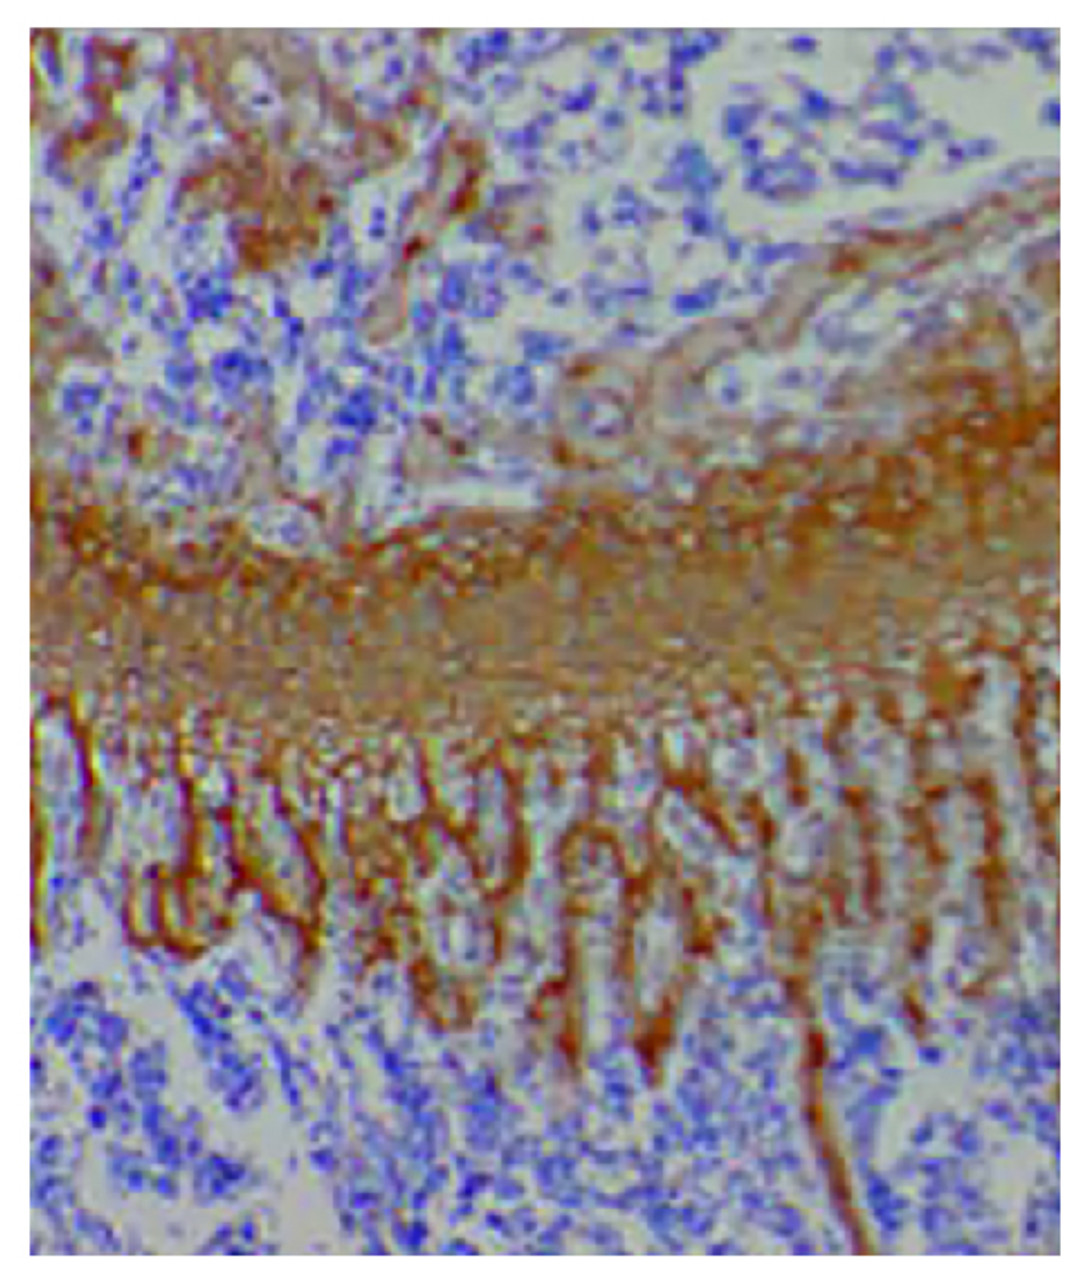 Paraffin embedded Col2a1-Cre;Nppcflox/flox mouse tibial growth plate section was stained with Goat Anti-Type II Collagen-UNLB (Cat. No. 98-503) followed by an HRP secondary antibody and DAB.

Image from Nakao K, Osawa K, Yasoda A, Yamanaka S, Fujii T, Kondo E, et al. The local CNP/GC-B system in growth plate is responsible for physiological endochondral bone growth. Sci Rep. 2015;5:10554. Figure 2 (d)